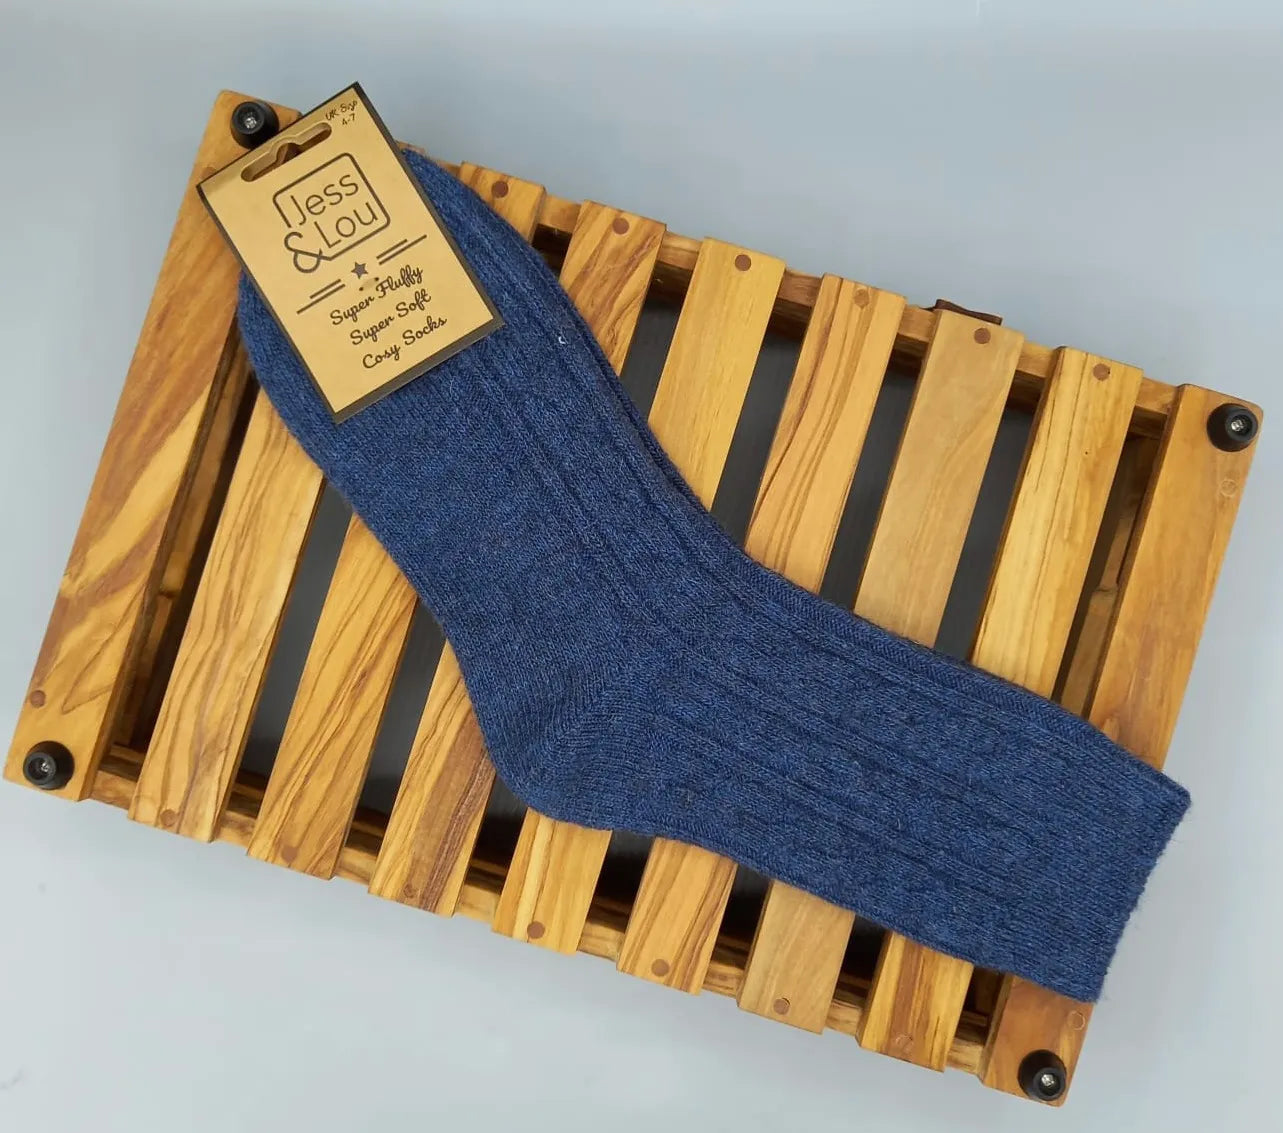 Cable Cosy Socks - Navy